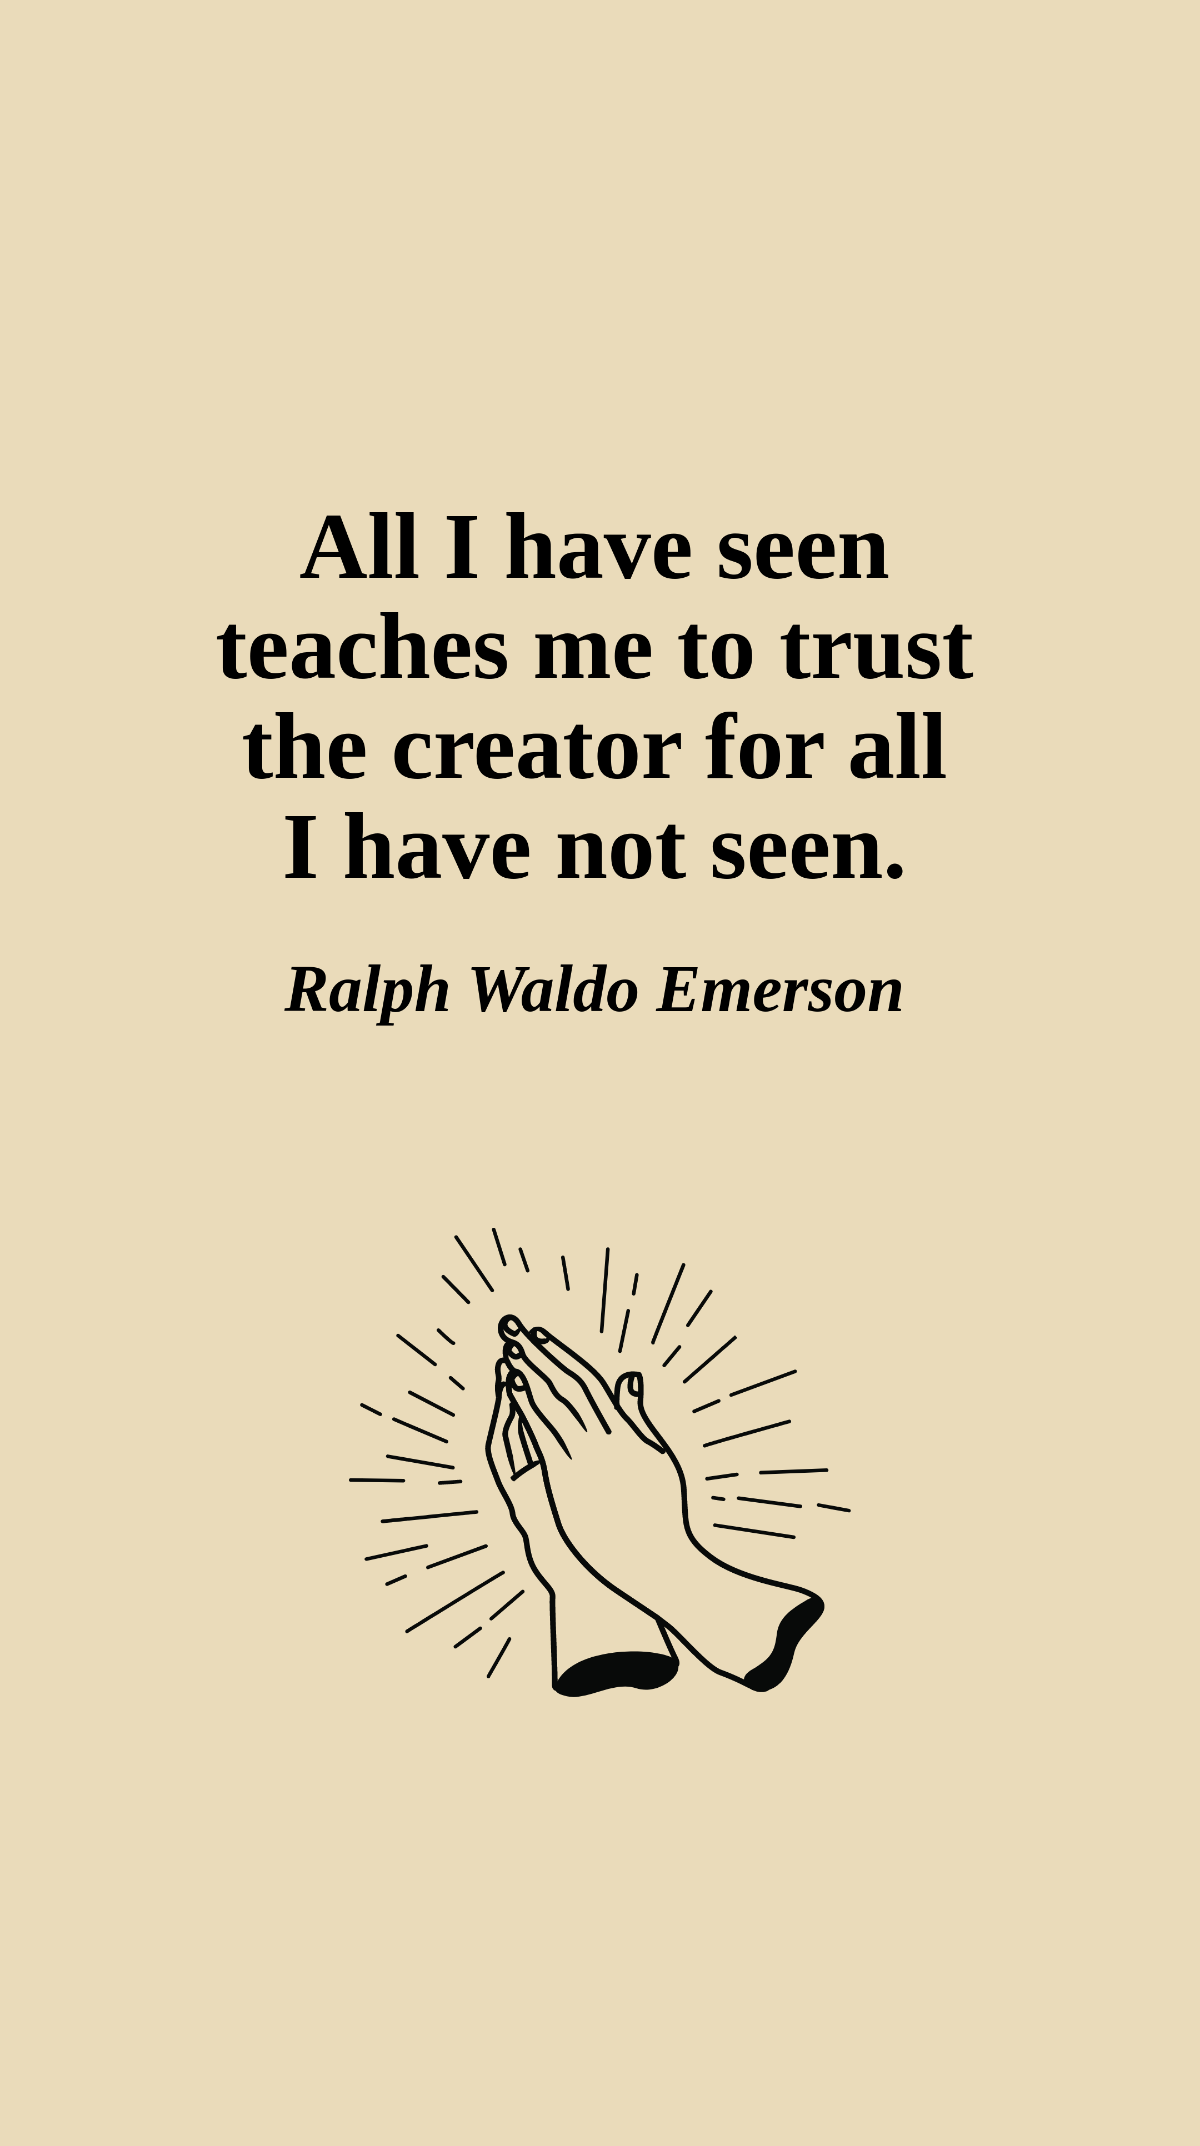 Ralph Waldo Emerson - All I have seen teaches me to trust the creator for all I have not seen. Template